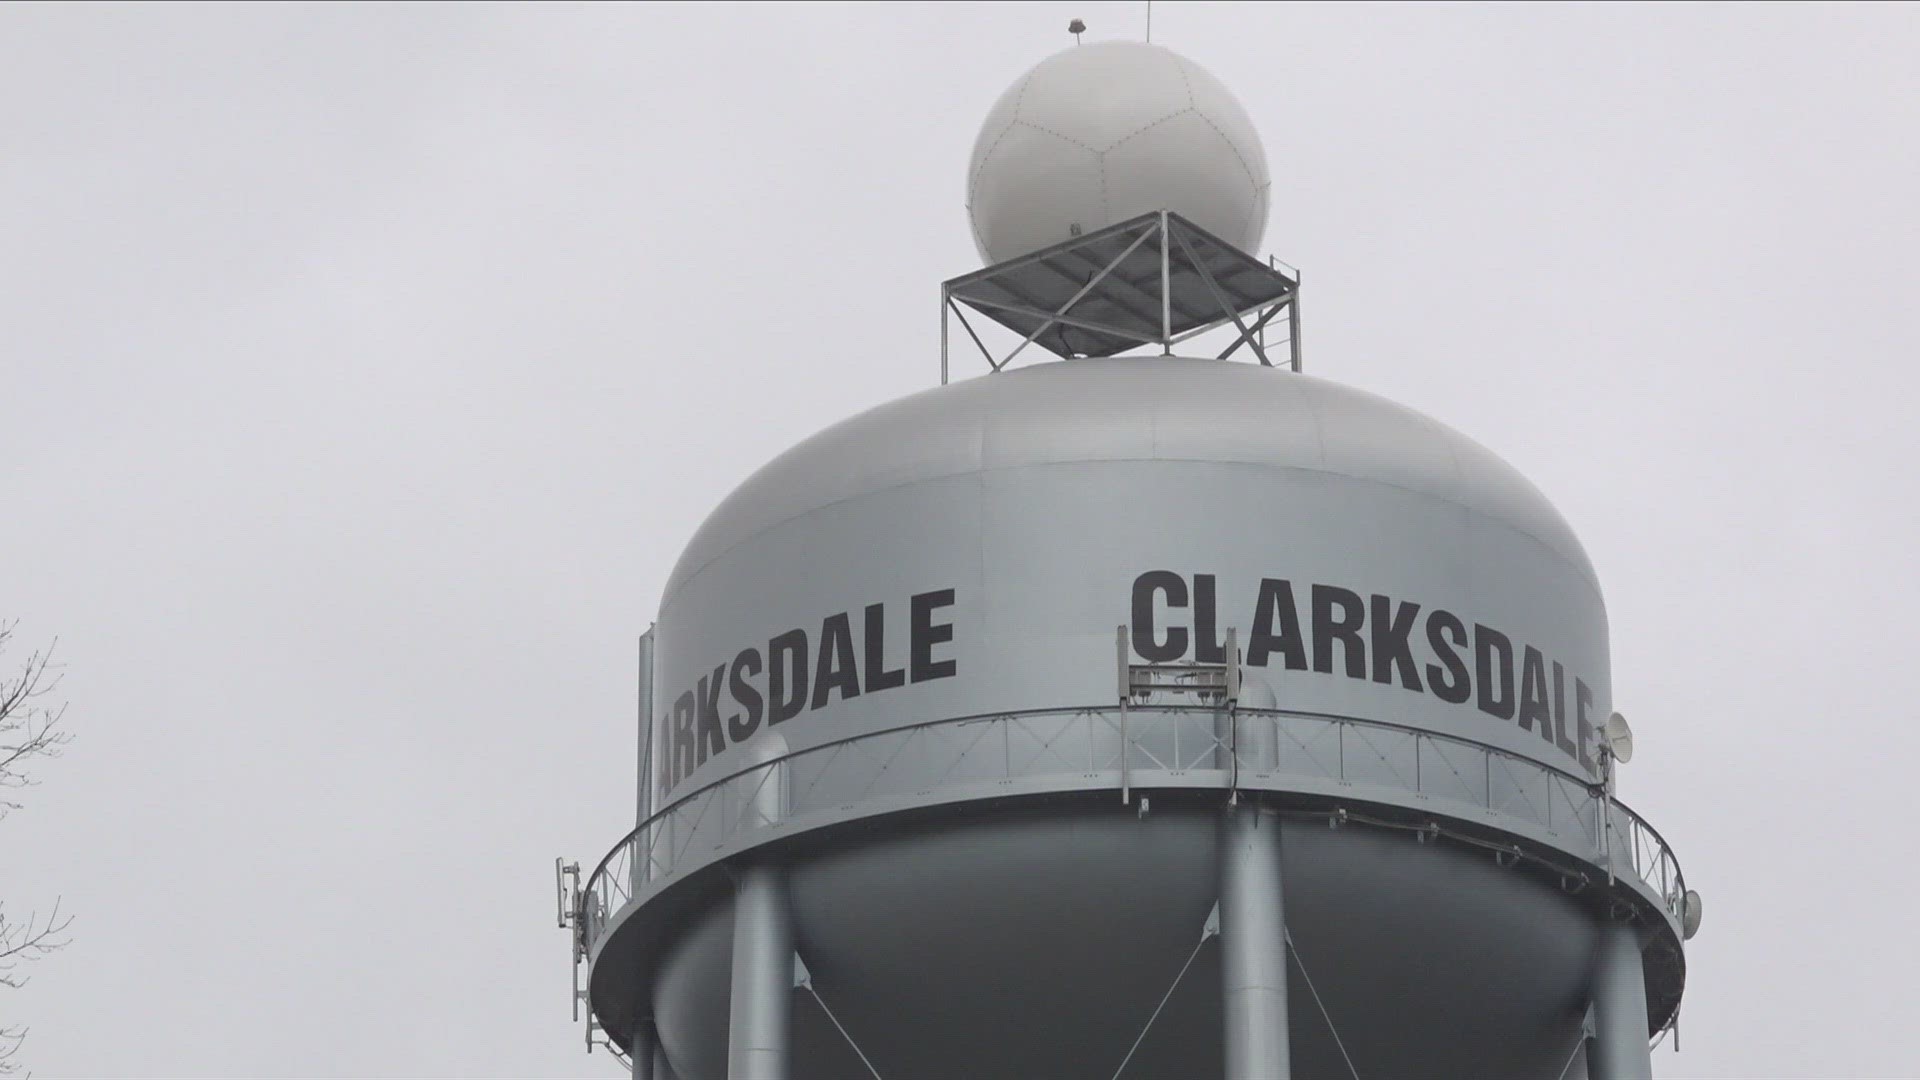 The radar operated by Climavision will be a useful tool for local and federal government agencies. It will also address a radar gap that has existed for decades.